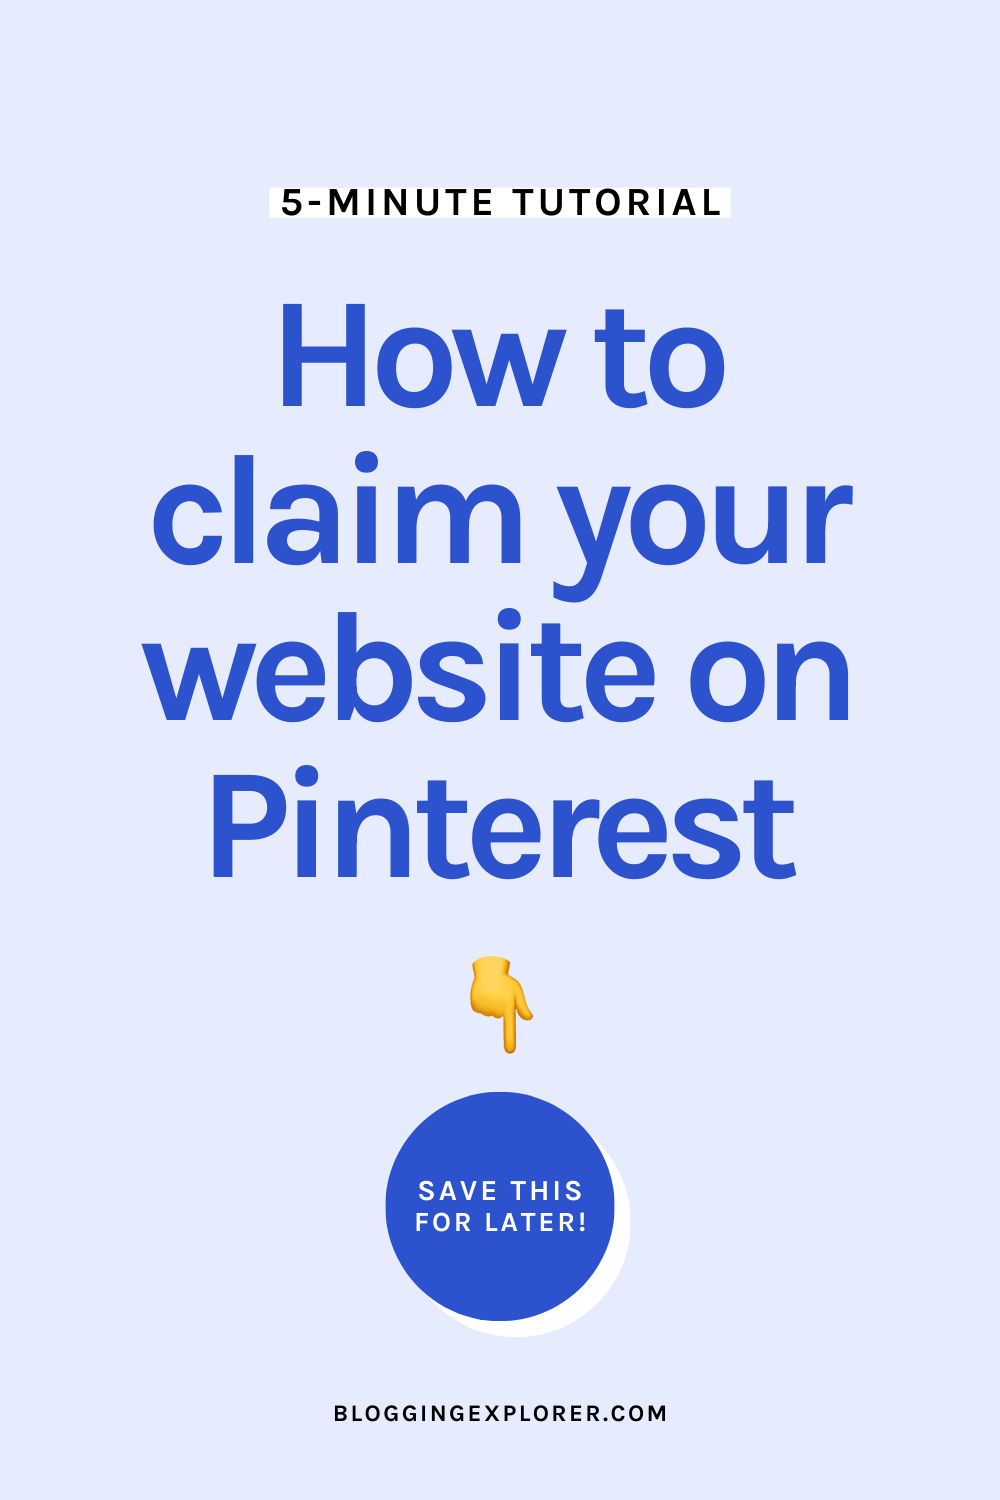 How to claim your website on Pinterest – Step-by-step tutorial